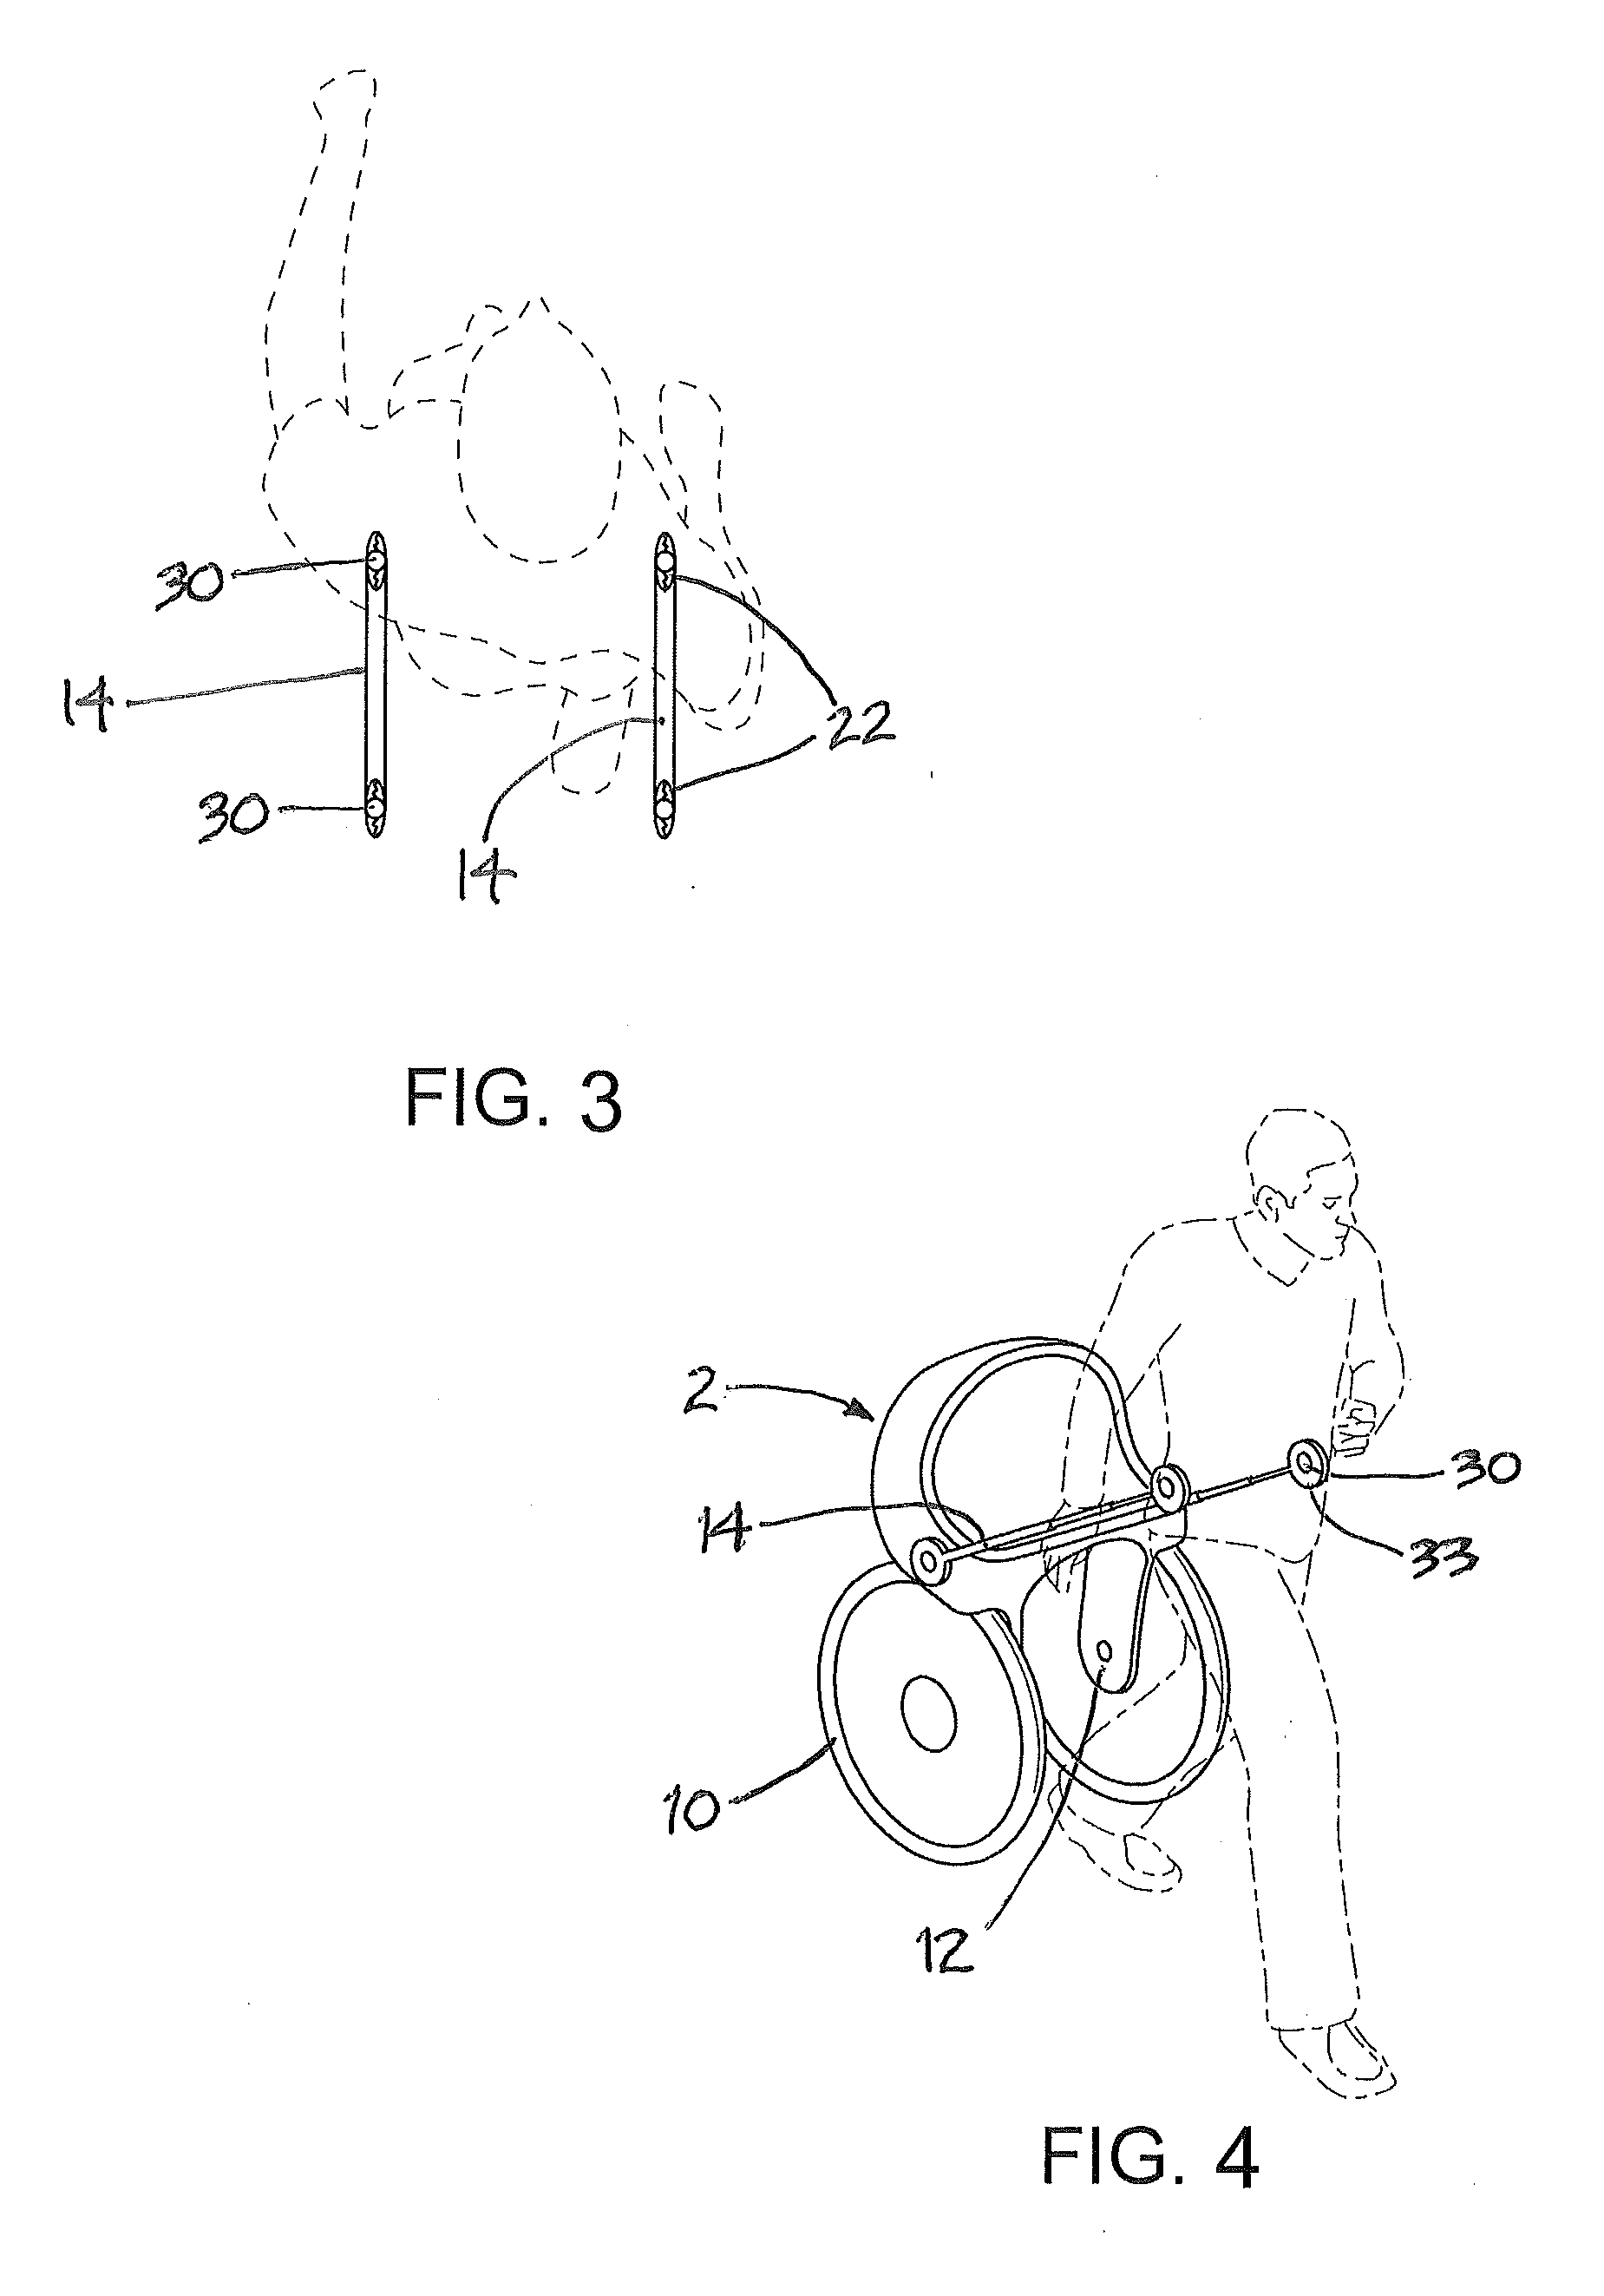 Hands free carriage and harness assembly having multiple modes of towing a load